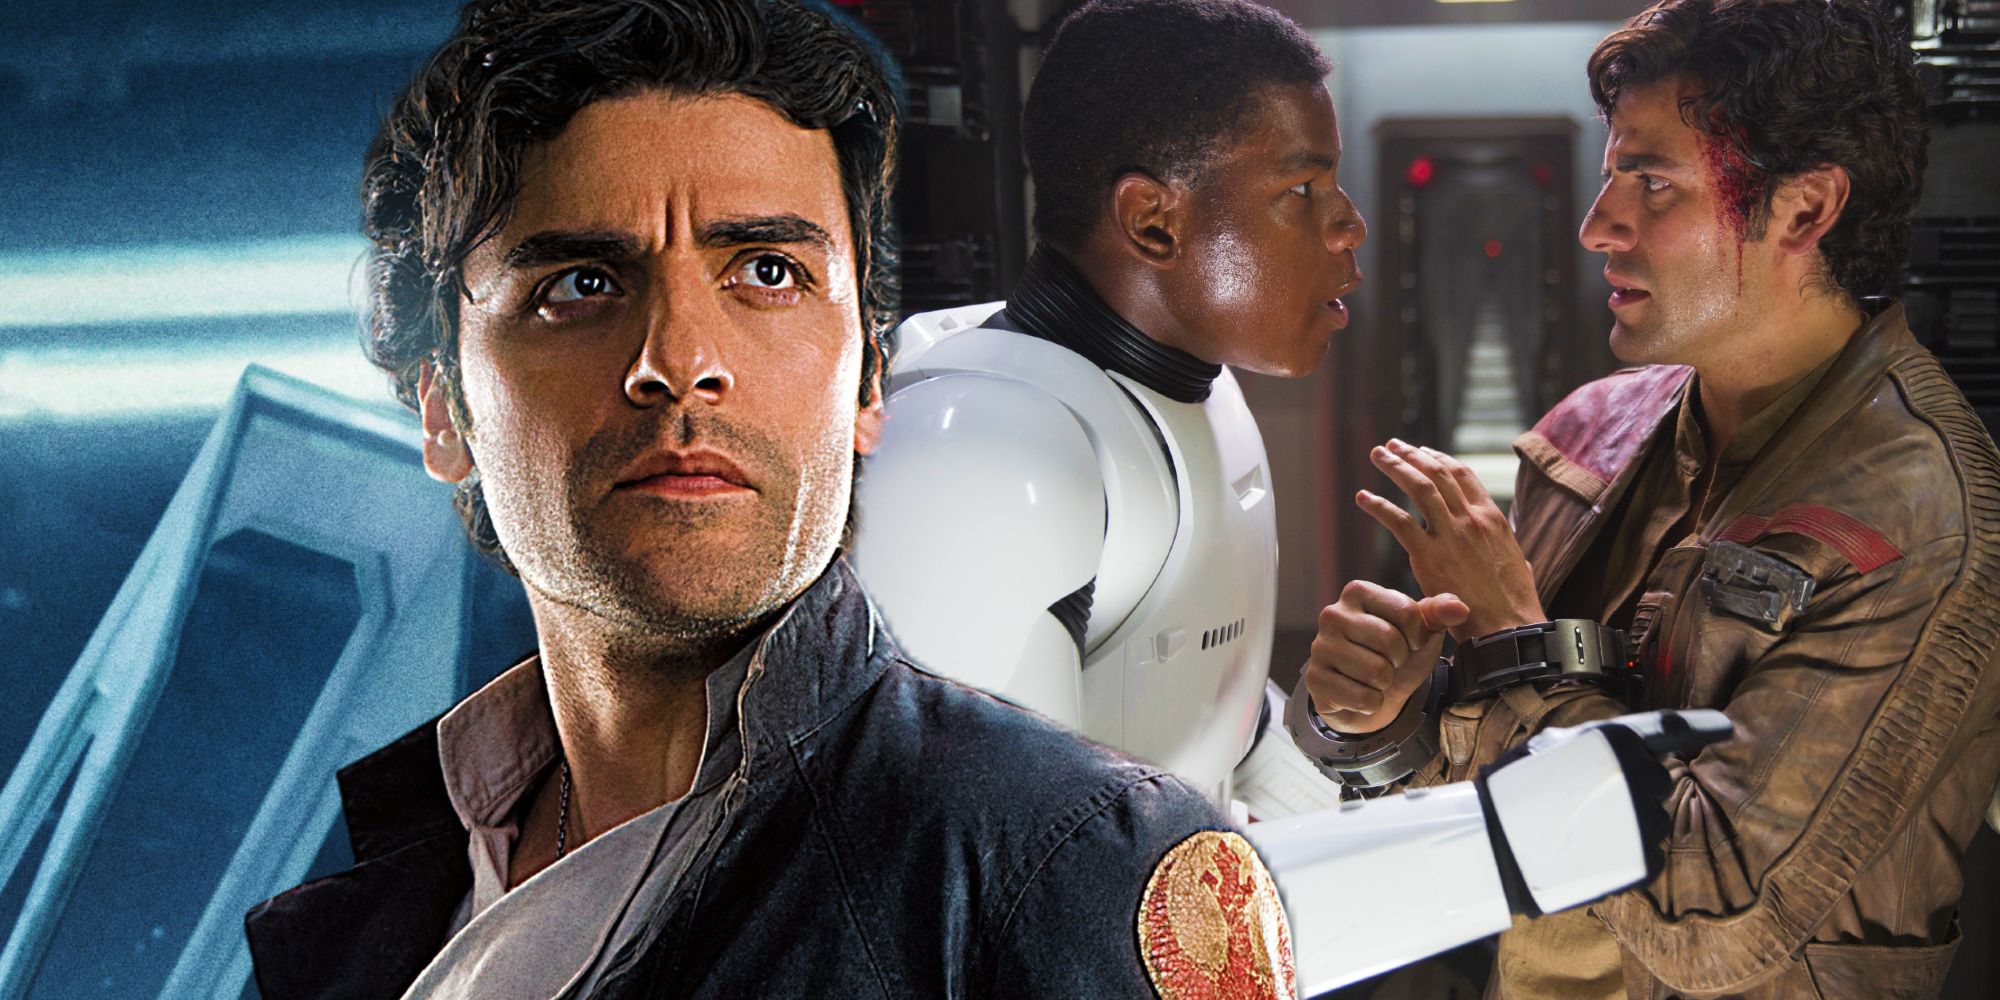 Poe Almost Shot Finn In Force Awakens: How It Changes The Star Wars Sequels